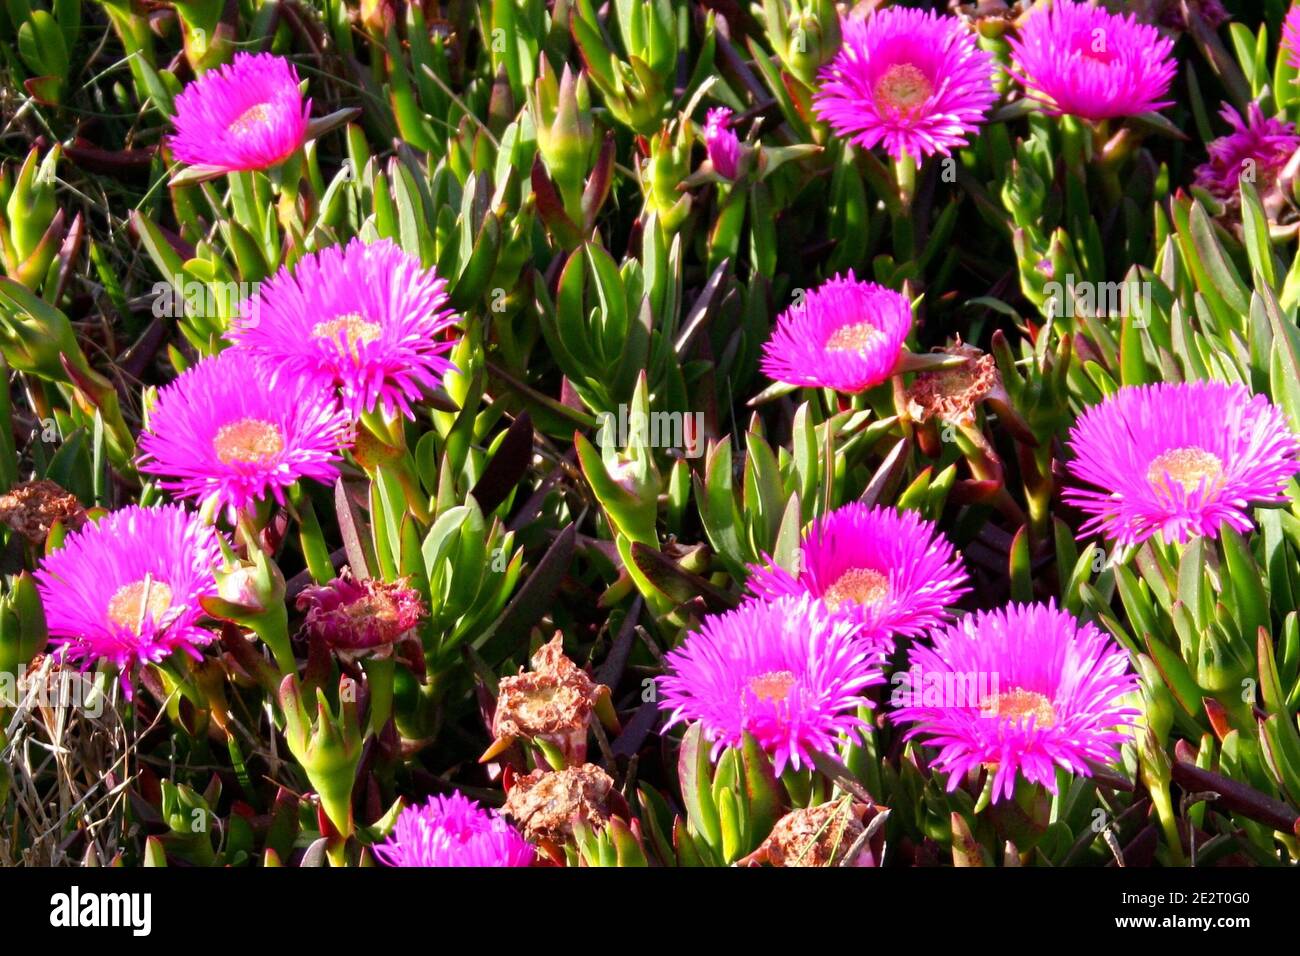 Bright pink flowers Sally-my-handsome plant (Carpobrotus acinaciformis) also known as a Hottentot Fig-marigold, Giant Pigface, Sea Fig, or Sour Fig Stock Photo